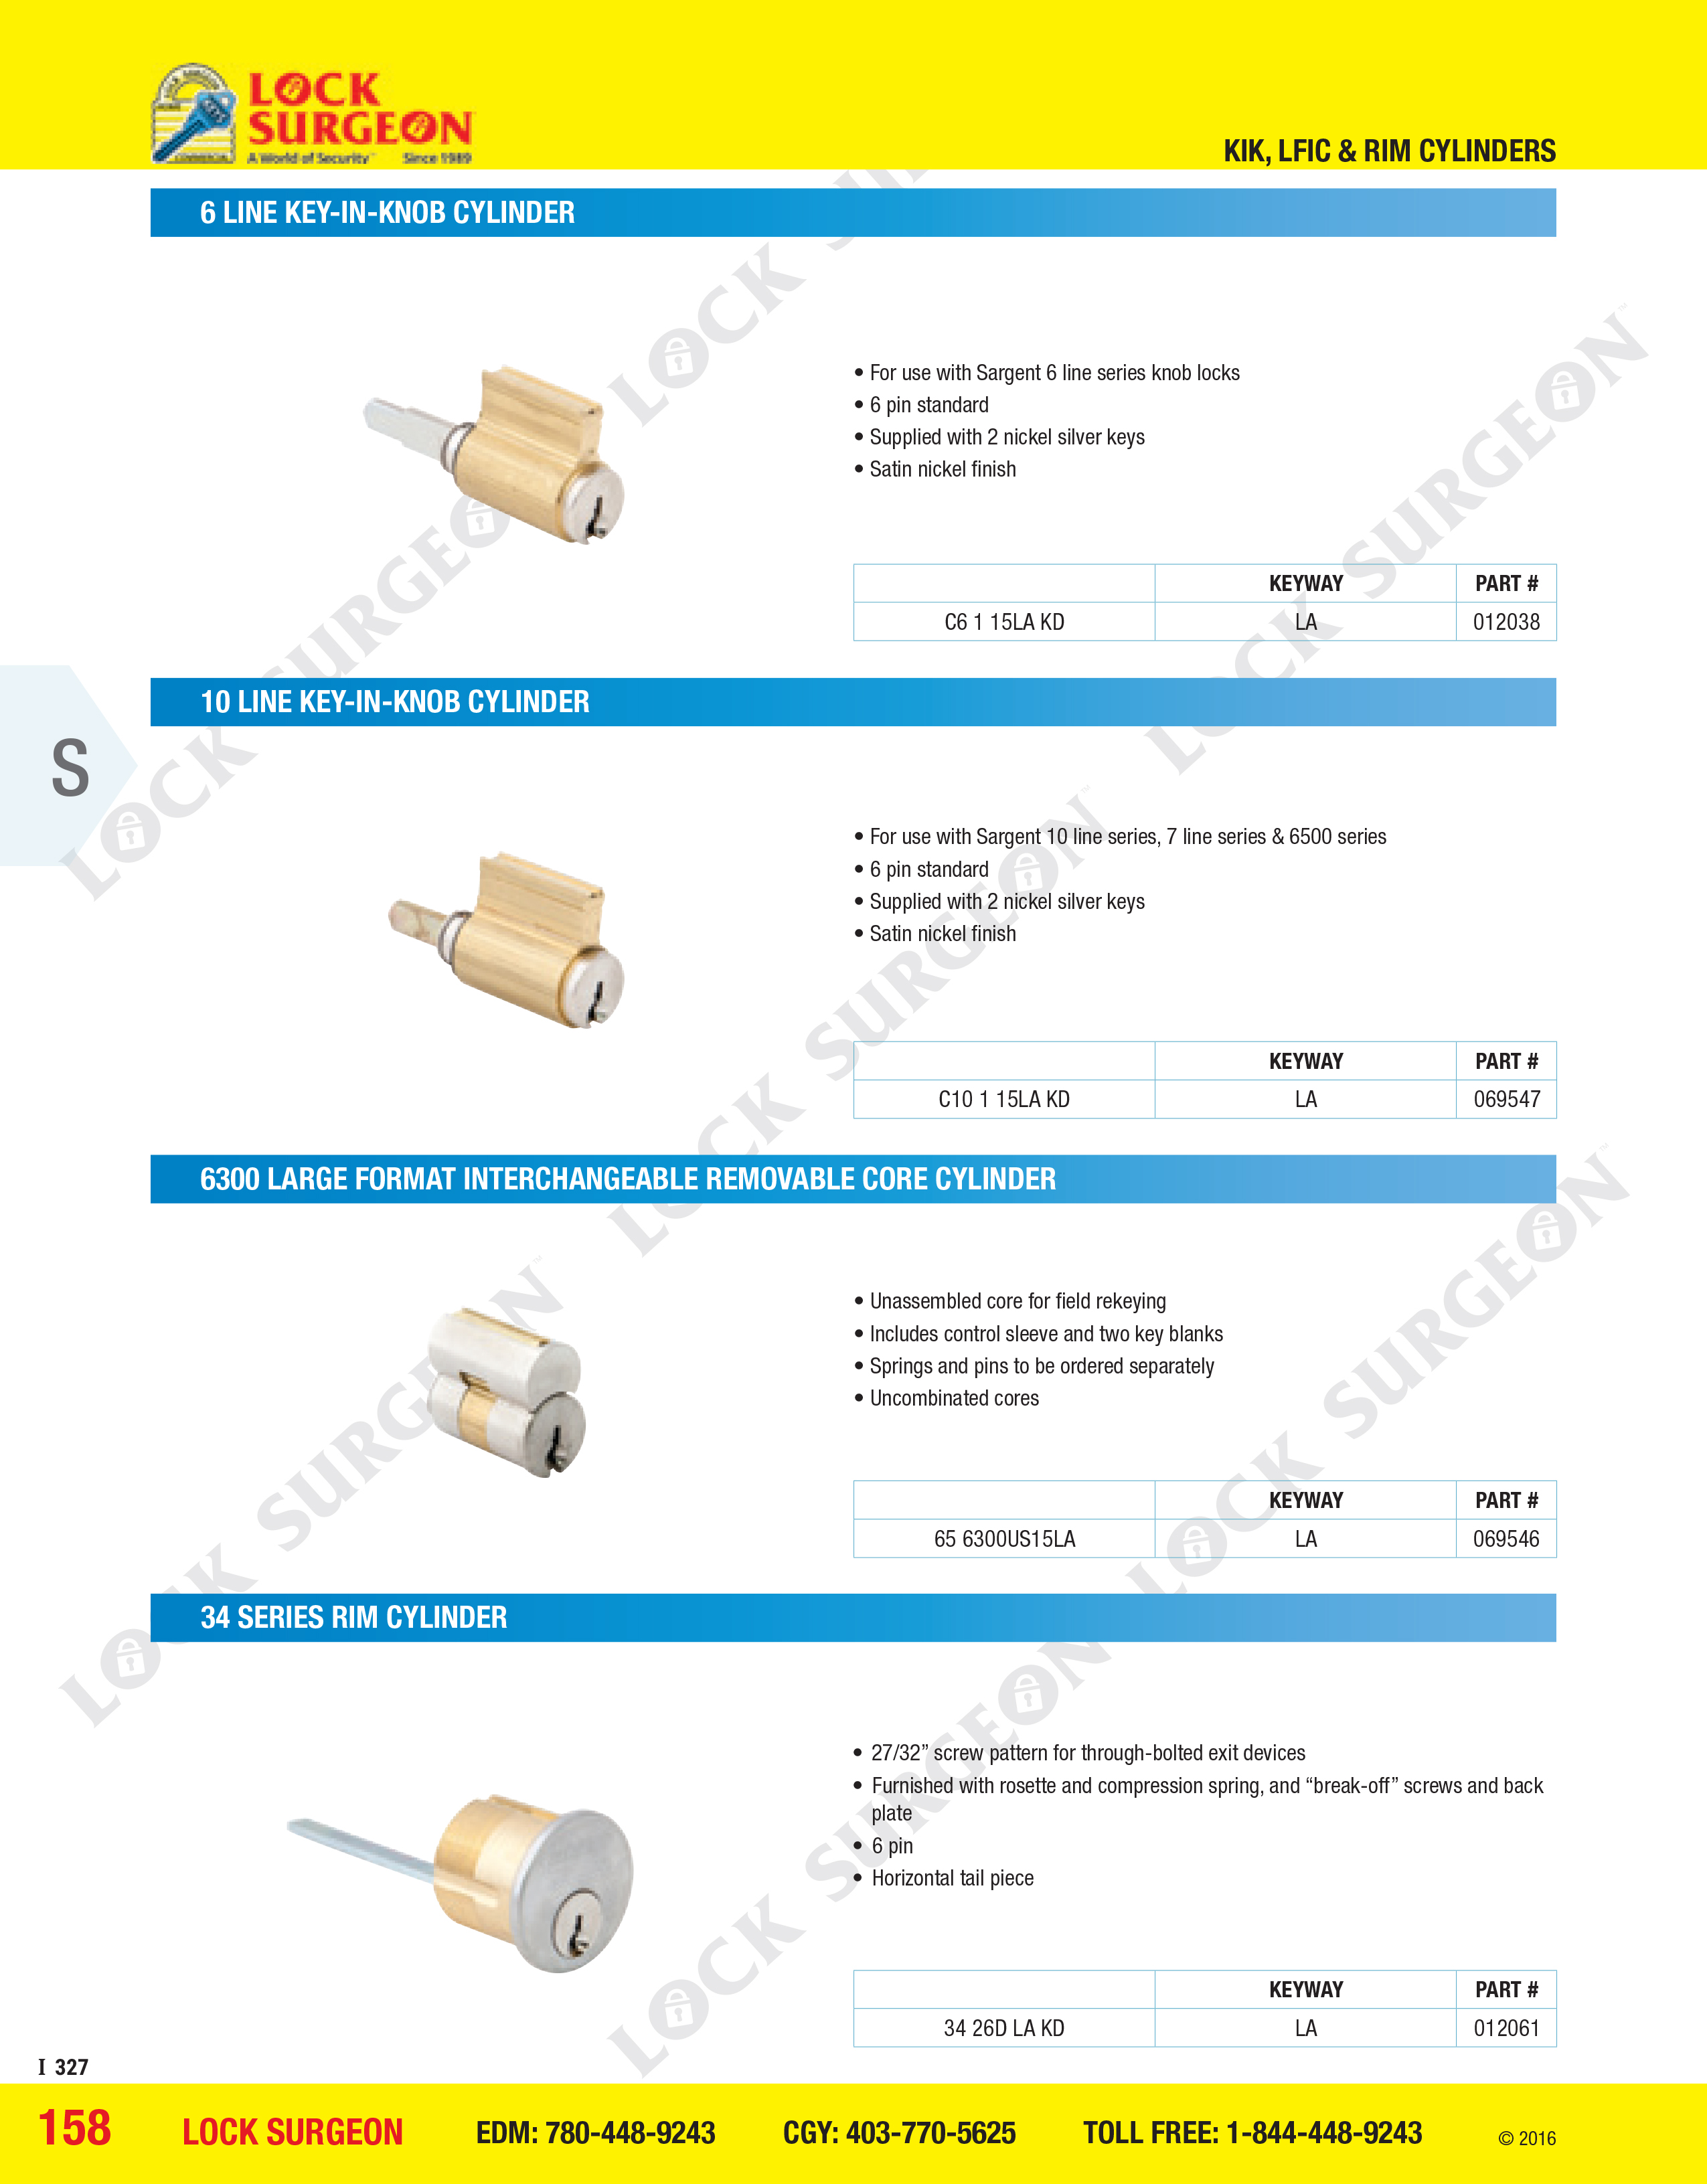 6 & 10-line key-in-knob cylinder 6300 Large format changeable core & 34-Series rim cylinder Acheson.